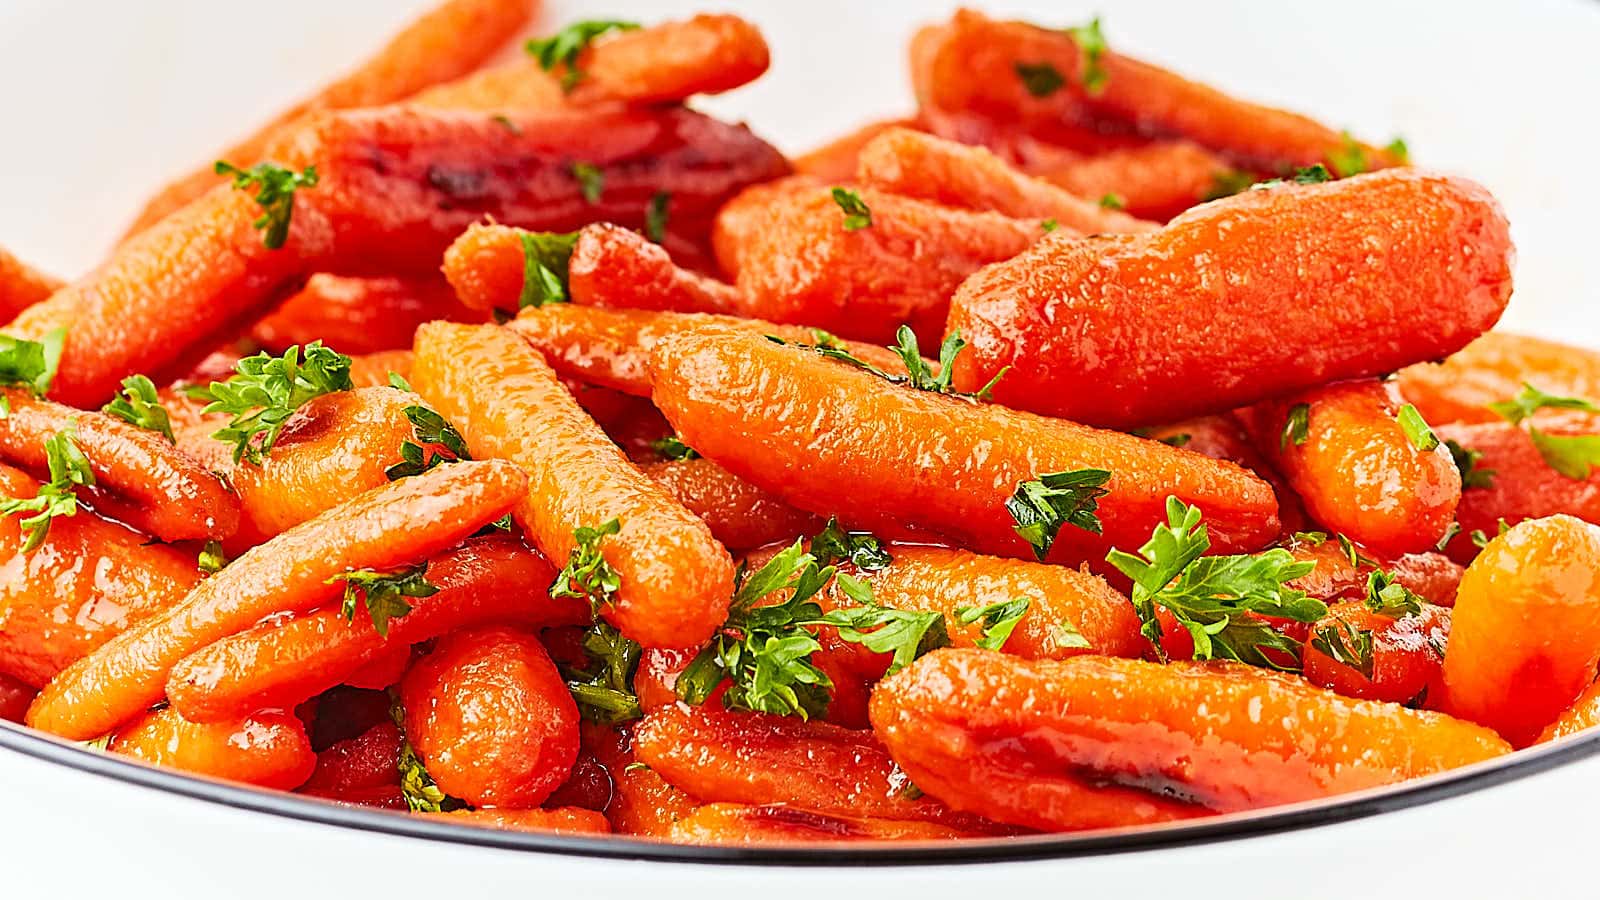 Candied Carrots recipe by Cheerful Cook.